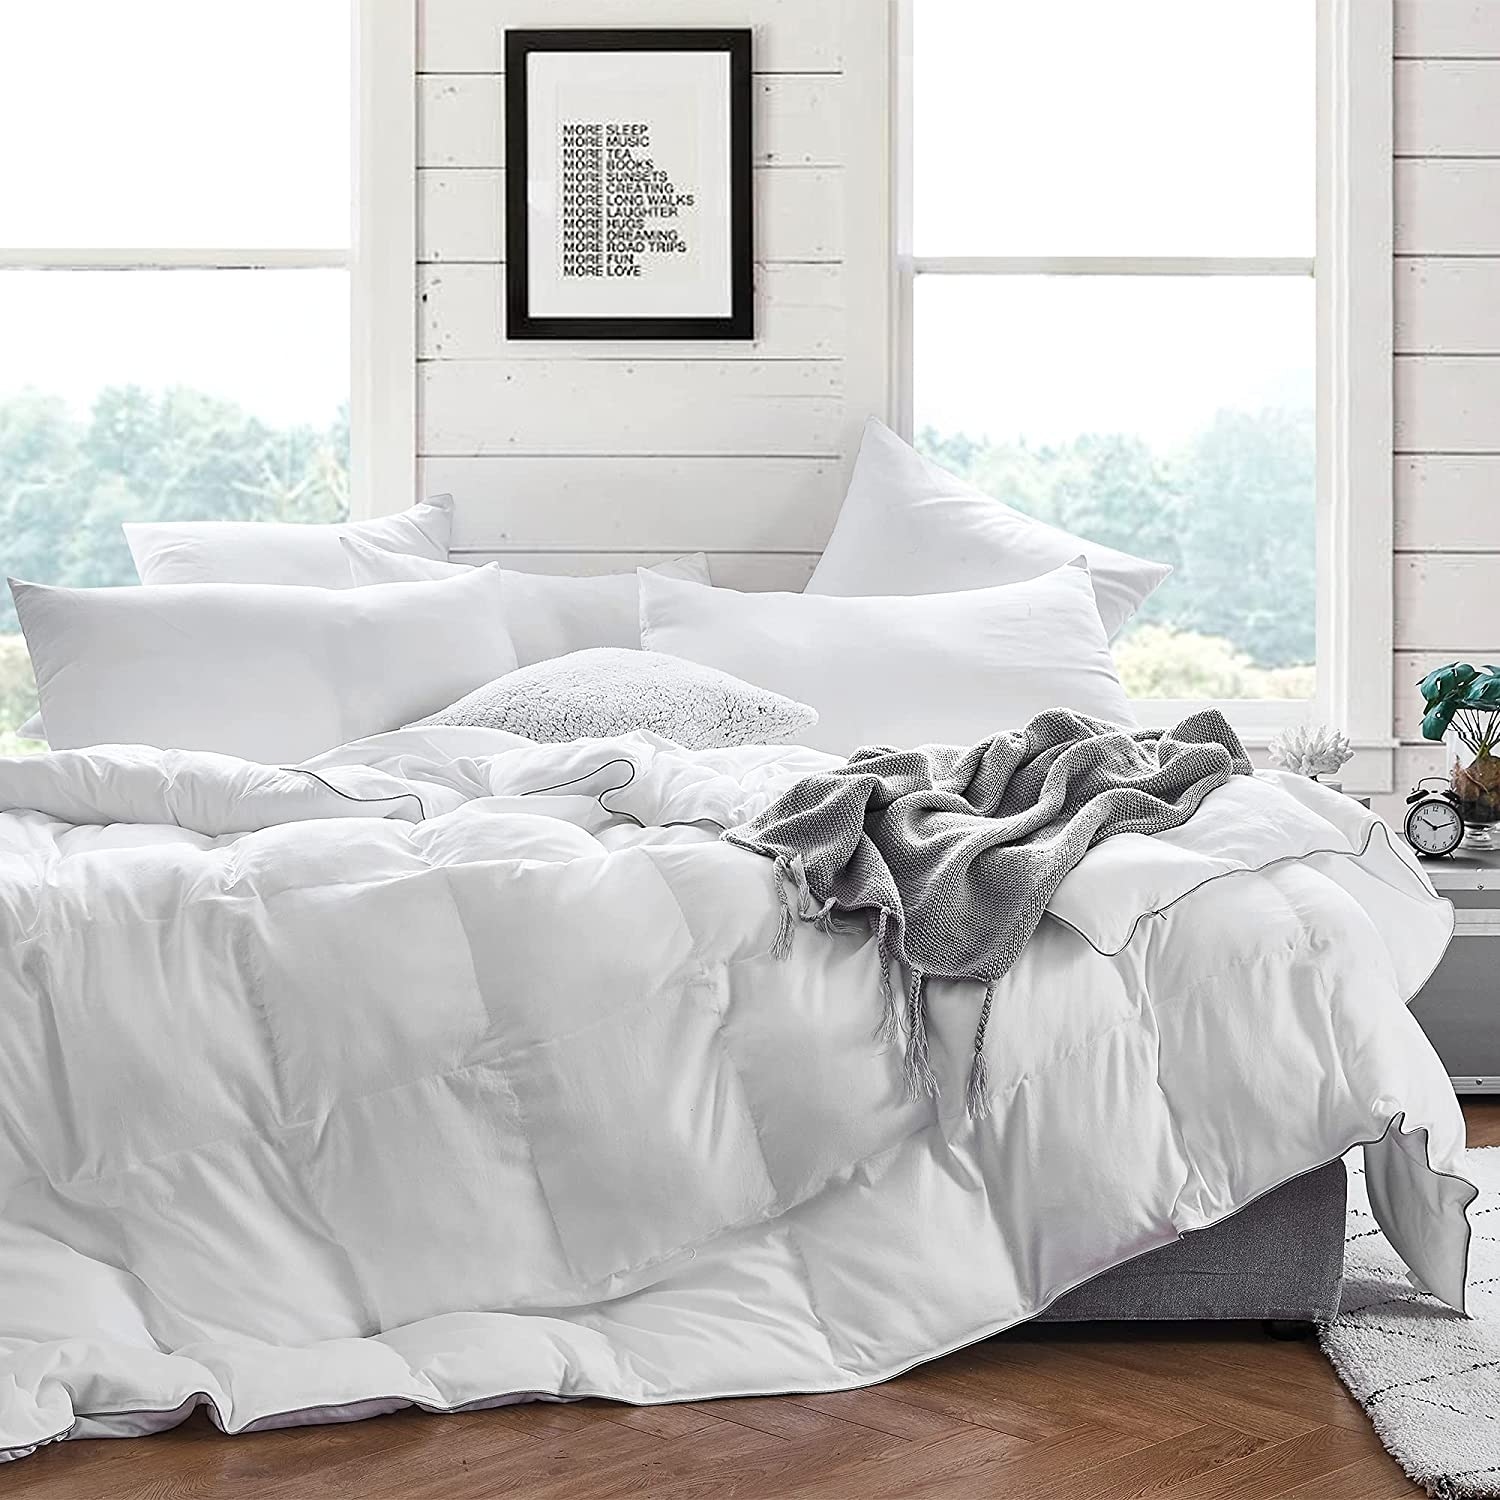 Snorze® Cloud Comforter Set - Coma Inducer® Oversized Bedding in White